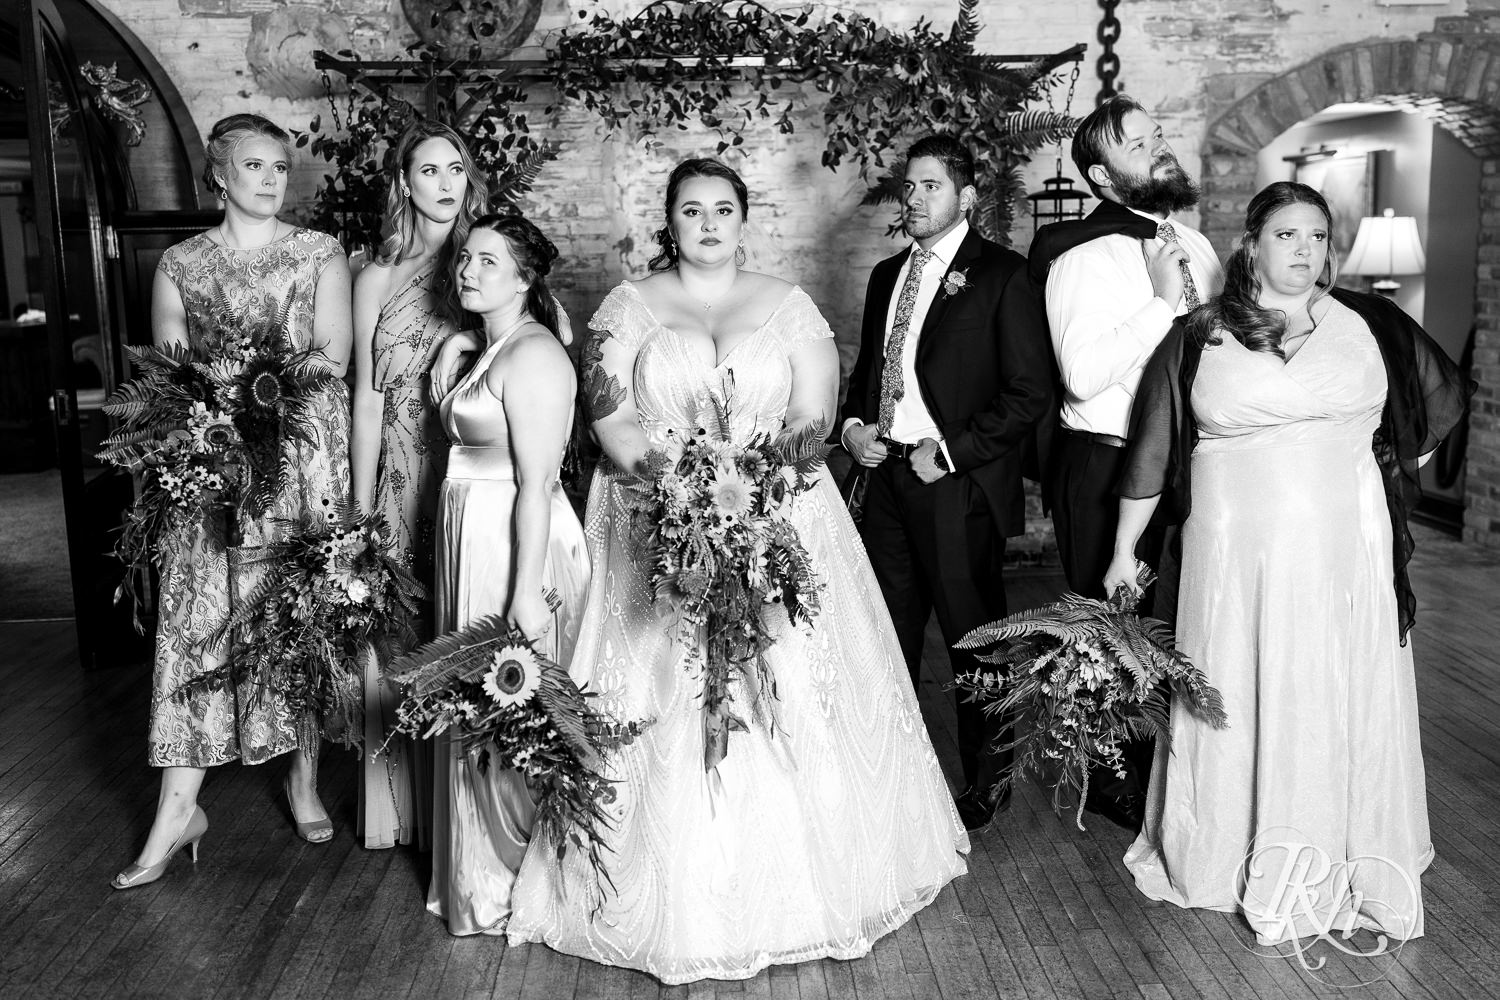 Plus size bride and groom smile with wedding party at Kellerman's Event Center in White Bear Lake, Minnesota.